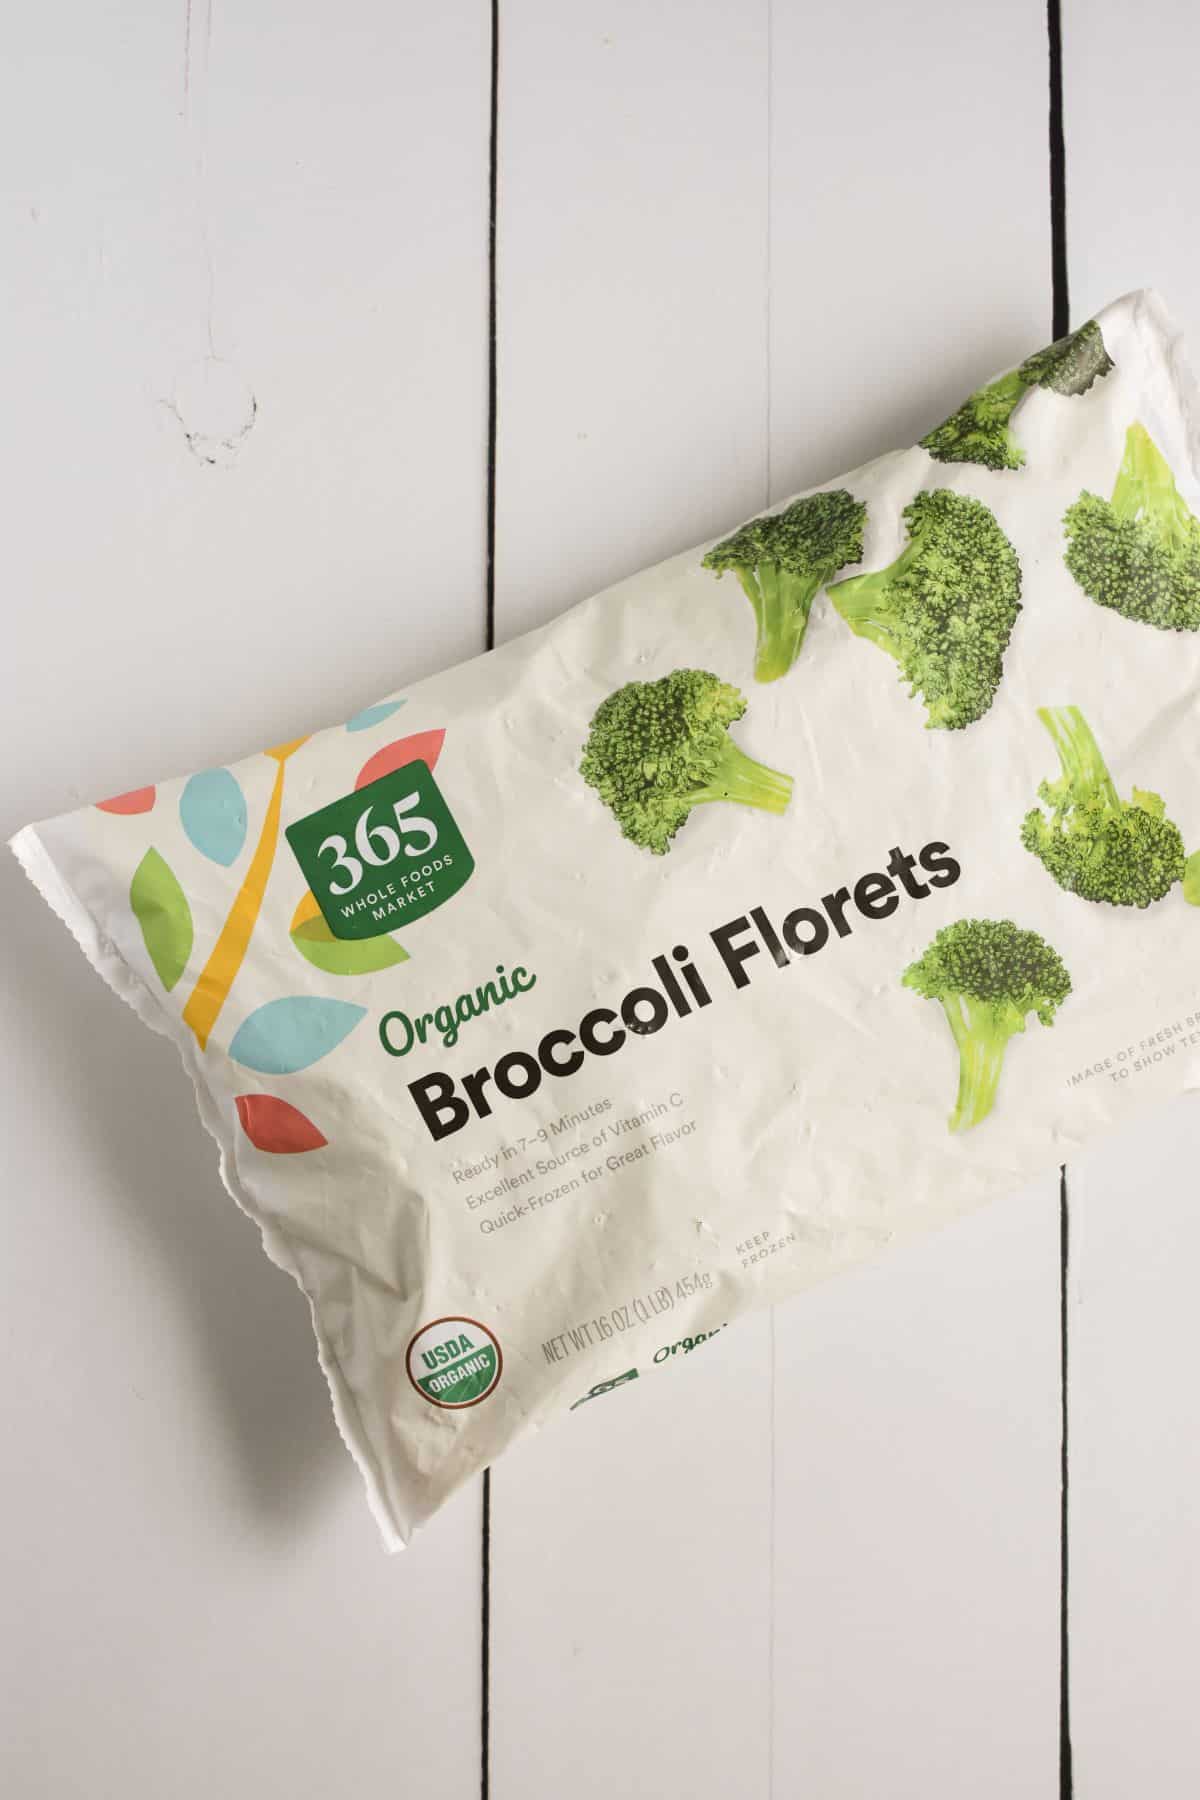 bag of frozen broccol florets on a table.